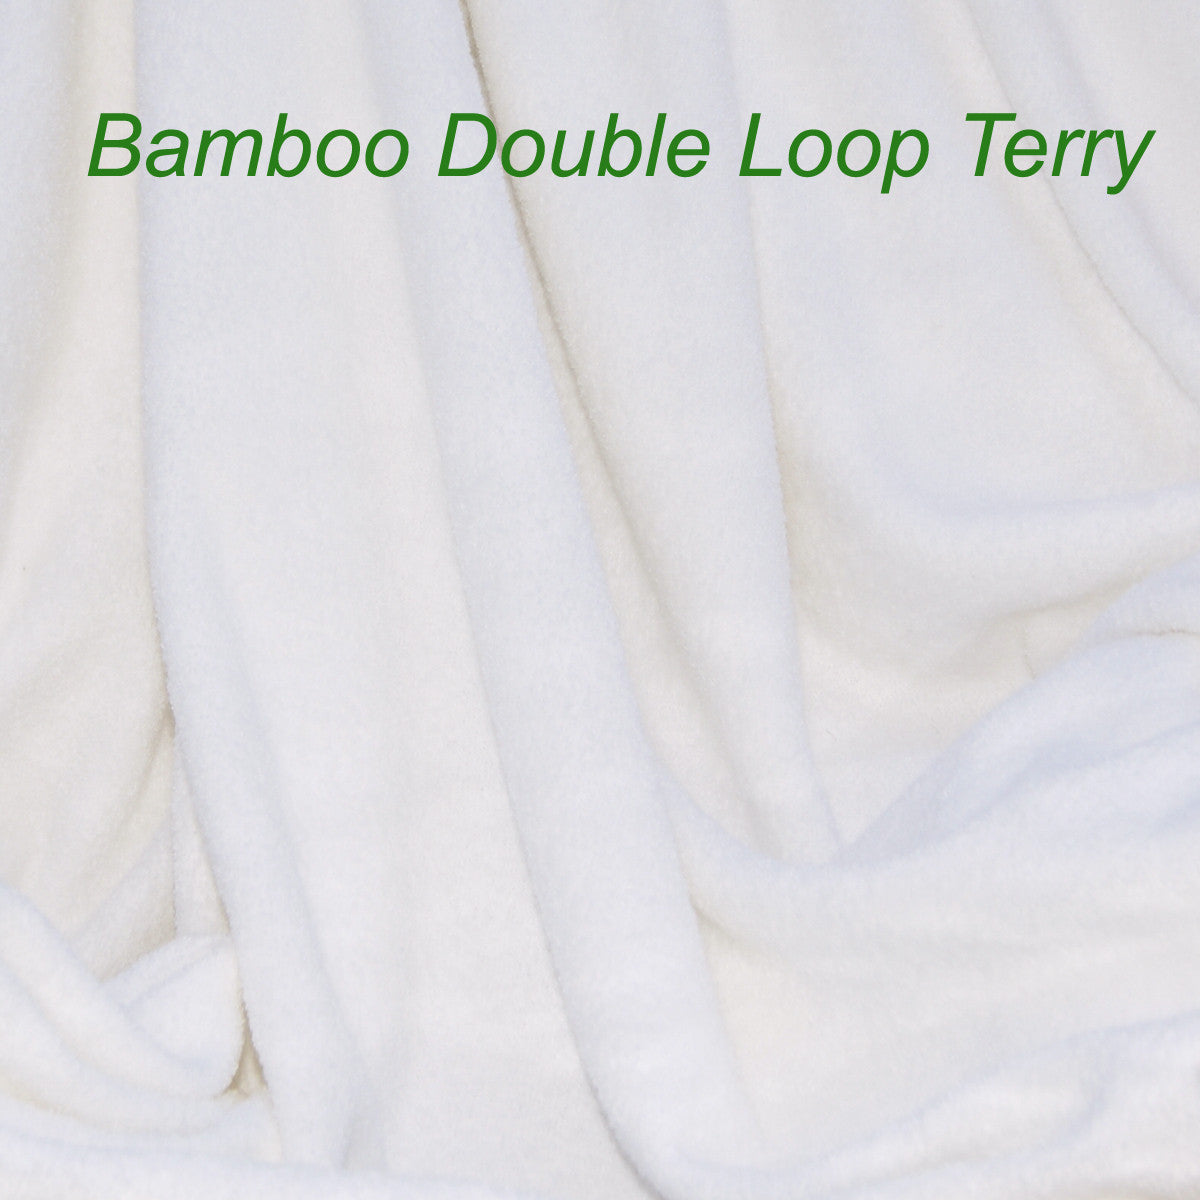 Bamboo Double Loop Terry Fabric, by the Yard